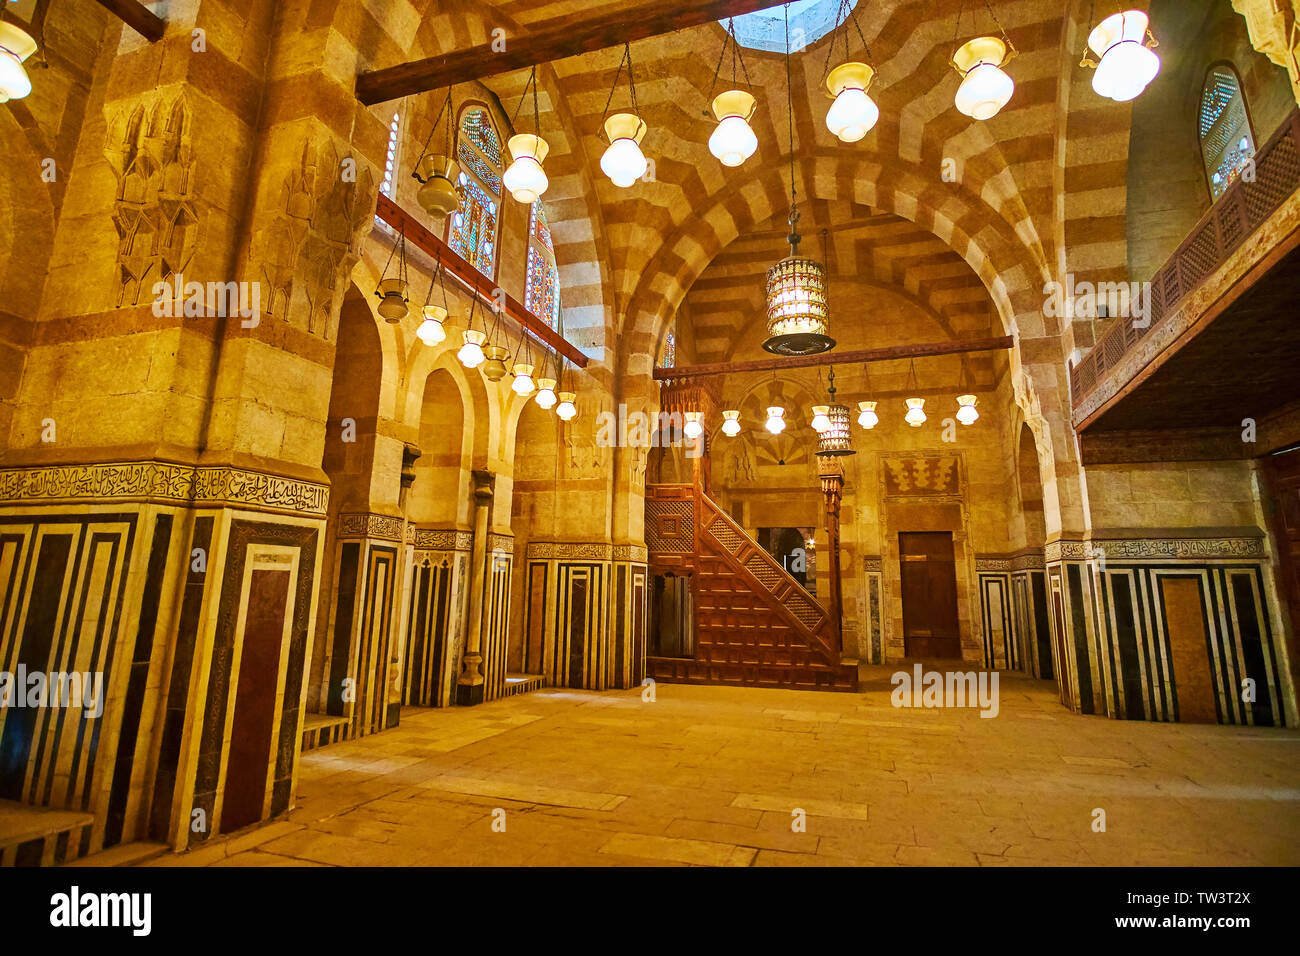 CAIRO, EGYPT - DECEMBER 22, 2017: The prayer hall of the Khayrbak mosque with rich stone decorations, wooden minbar and vintage lamps, on December 22 Stock Photo